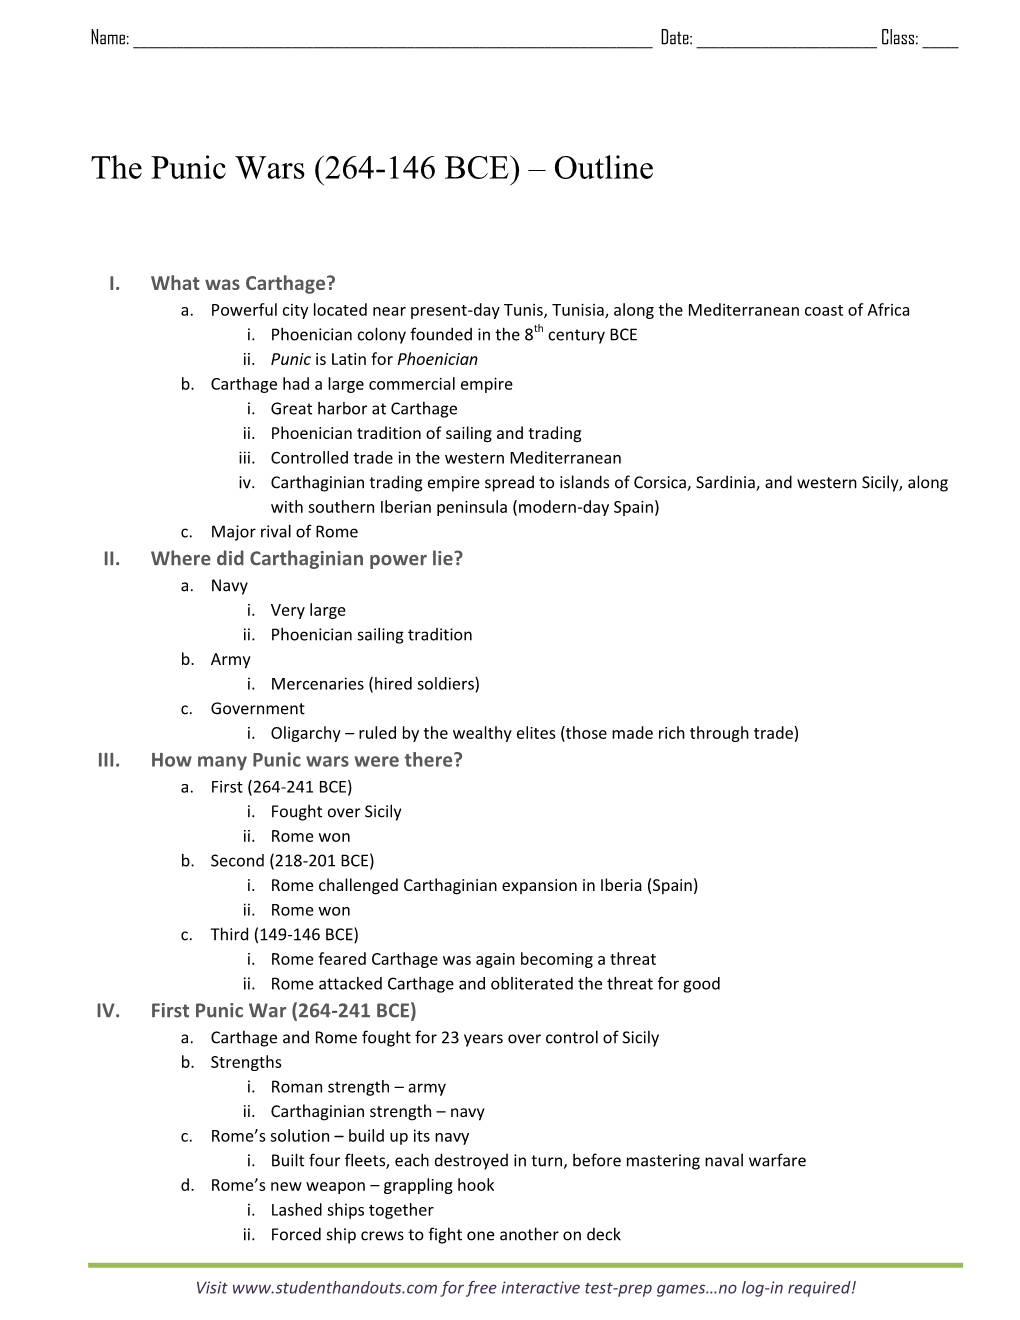 The Punic Wars (264-146 BCE) – Outline